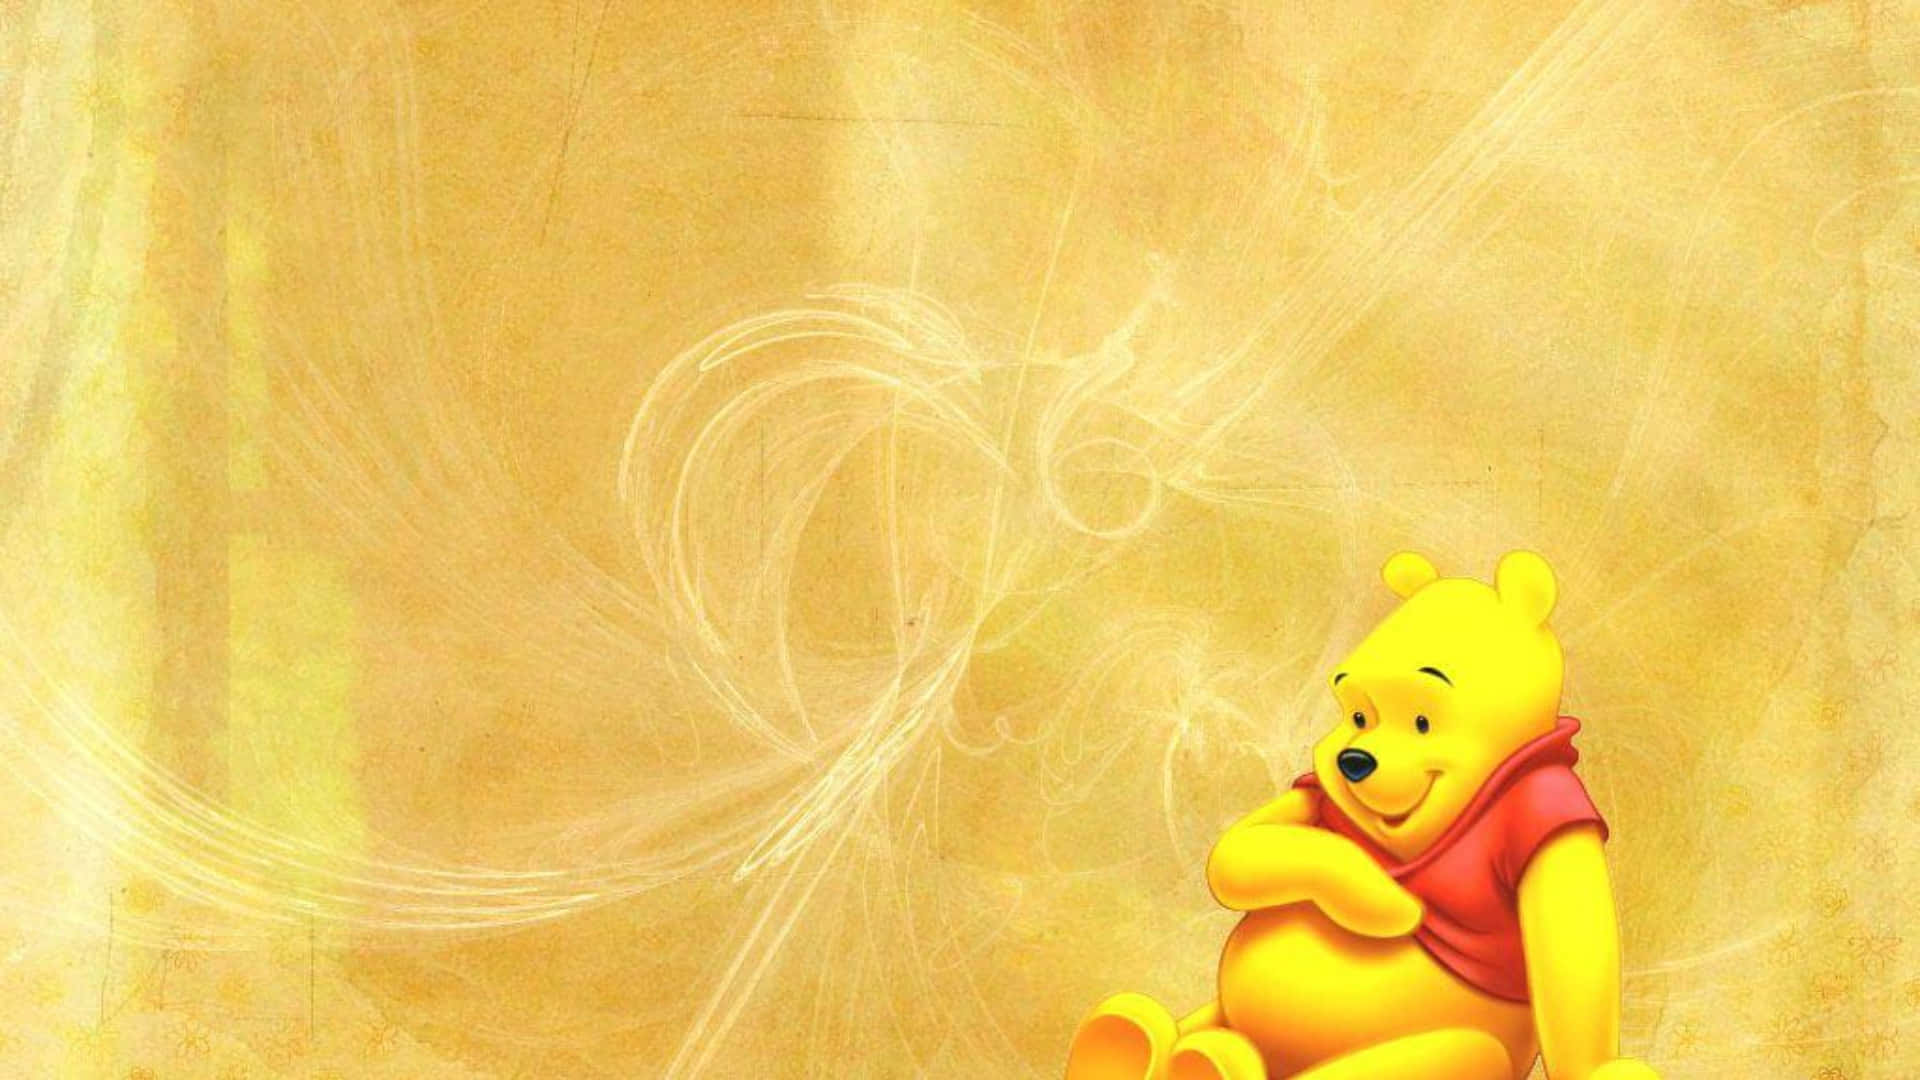 Get ready for the most exciting learning experience with Winnie The Pooh Laptop! Wallpaper